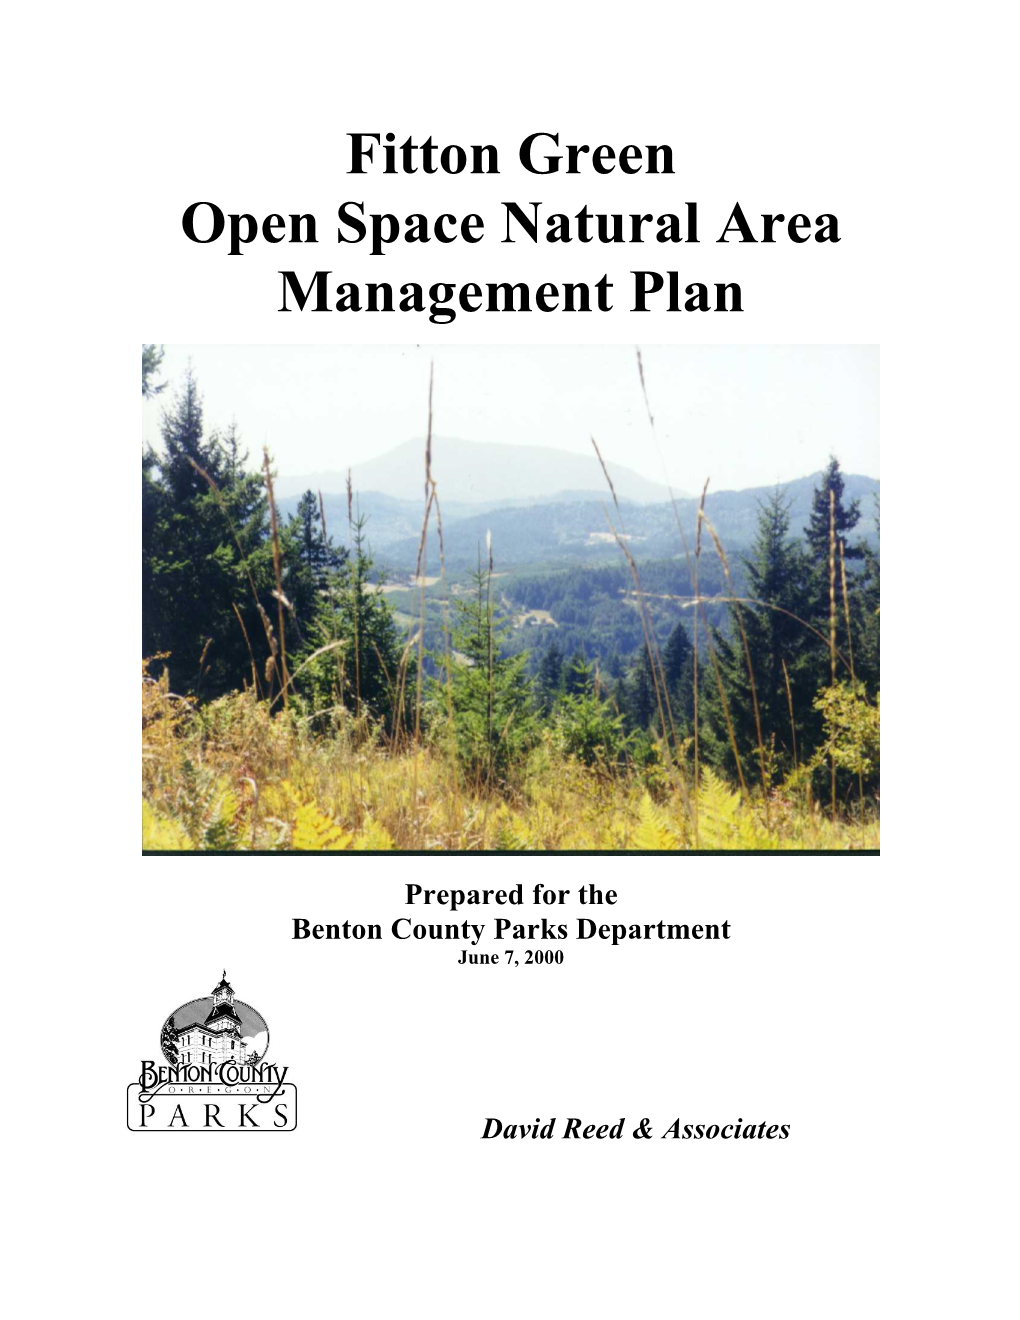 Fitton Green Open Space Natural Area Management Plan